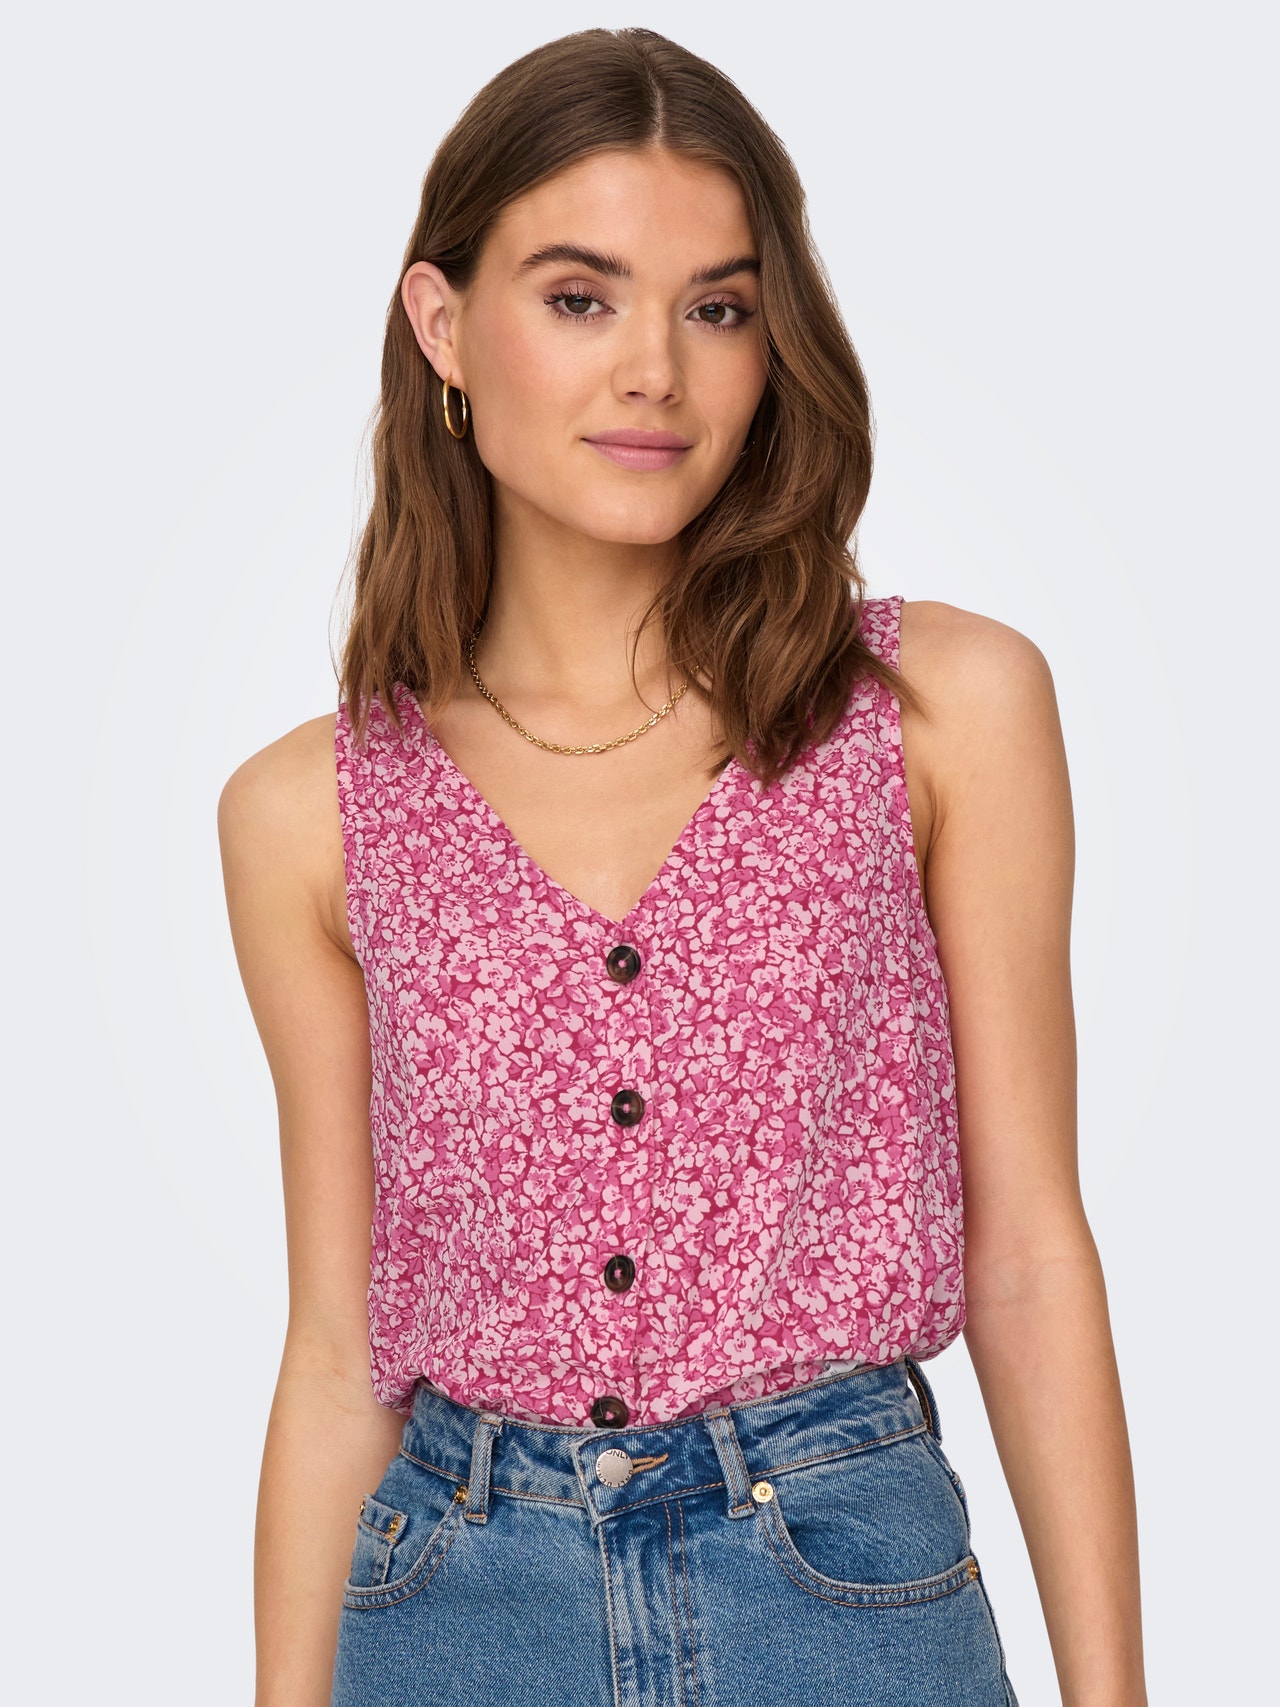 ONLY Boutonné Top -Very Berry - 15269332